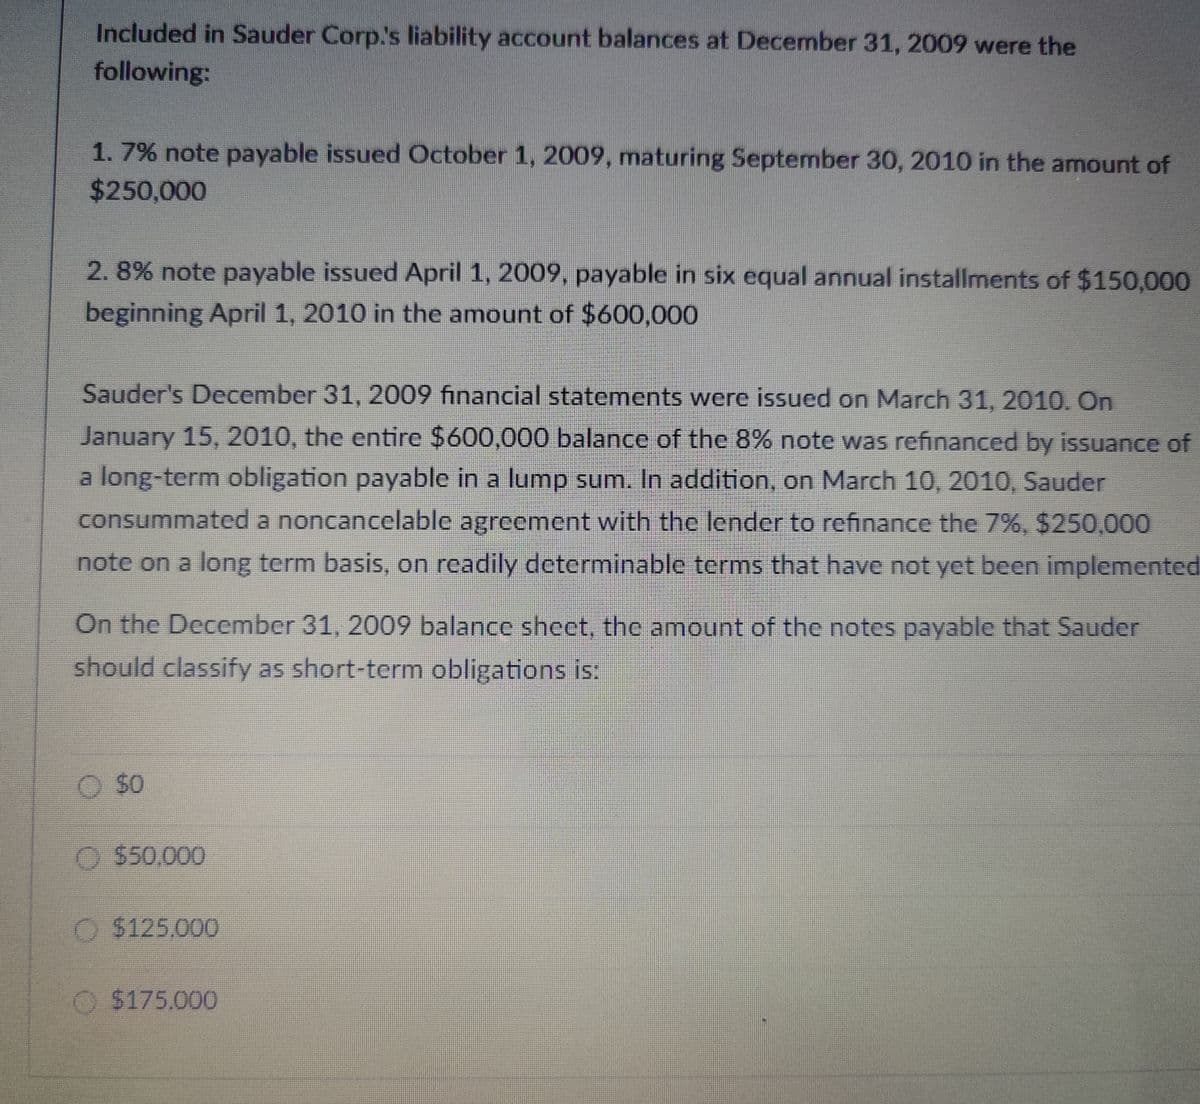 Included in Sauder Corp.'s liability account balances at December 31, 2009 were the
following:
1. 7% note payable issued October 1, 2009, maturing September 30, 2010 in the amount of
$250,000
2.8% note payable issued April 1, 2009, payable in six equal annual installments of $150,000
beginning April 1, 2010 in the amount of $600,000
Sauder's December 31, 2009 financial statements were issued on March 31, 2010. On
January 15, 2010, the entire $600,000 balance of the 8% note was refinanced by issuance of
a long-term obligation payable in a lump sum. In addition, on March 10, 2010, Sauder
consummated a noncancelable agreement with the lender to refinance the 7%, $250,000
note on a long term basis, on readily determinable terms that have not yet been implemented
On the December 31, 2009 balance sheet, the amount of the notes payable that Sauder
should classify as short-term obligations is:
$0
O $50,000
$125.000
$175.000